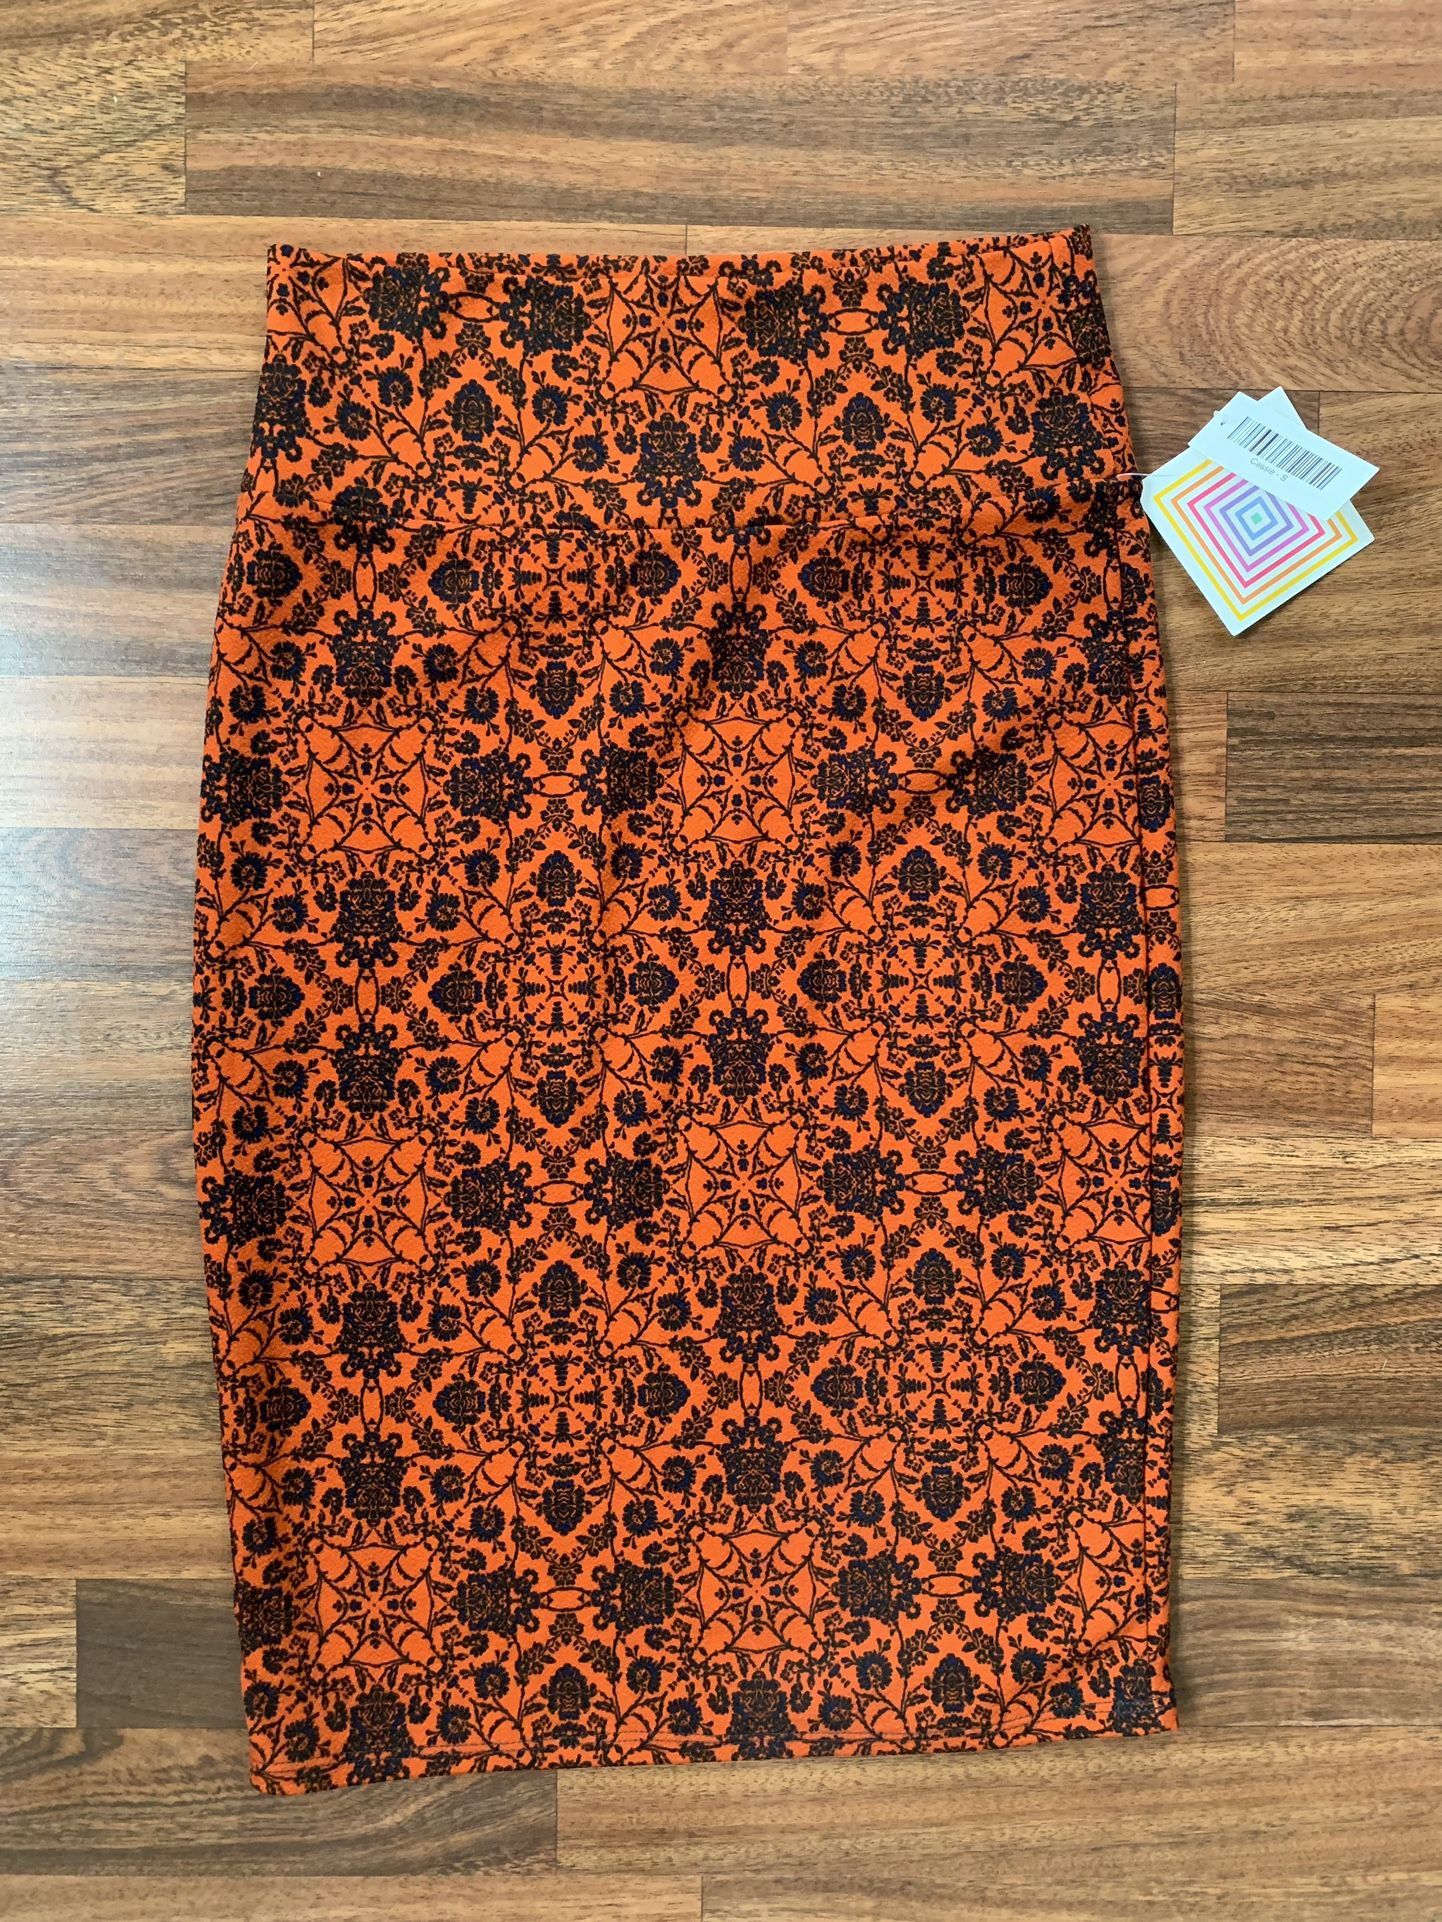 Lularoe Cassie Burnt Orange Skirt With Black Floral Detail Size Small. NWT